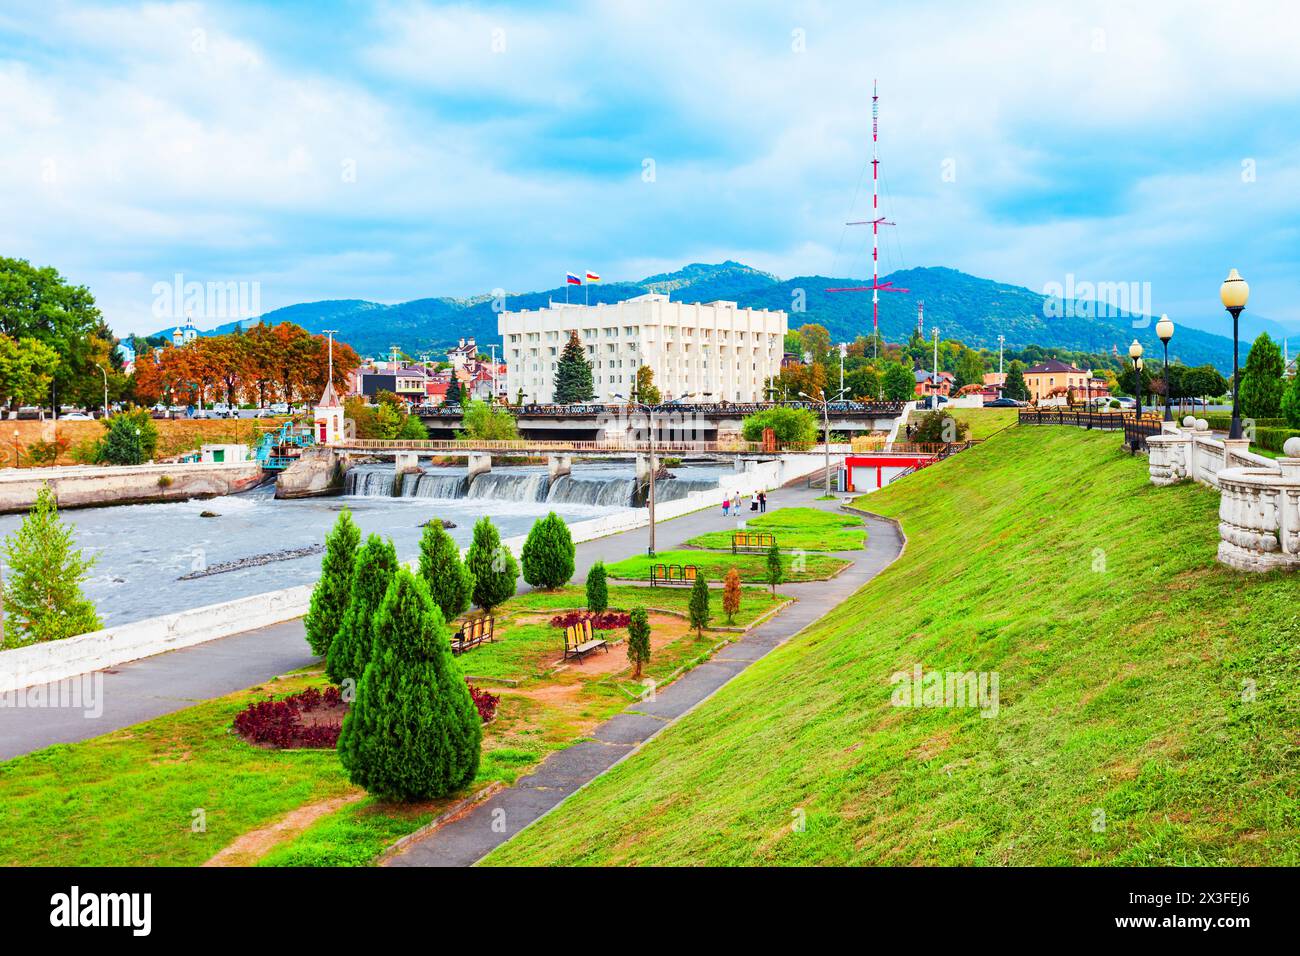 City administration building at the Terek river embankment in the centre of Vladikavkaz city, North Ossetia Alania, Russia Stock Photo